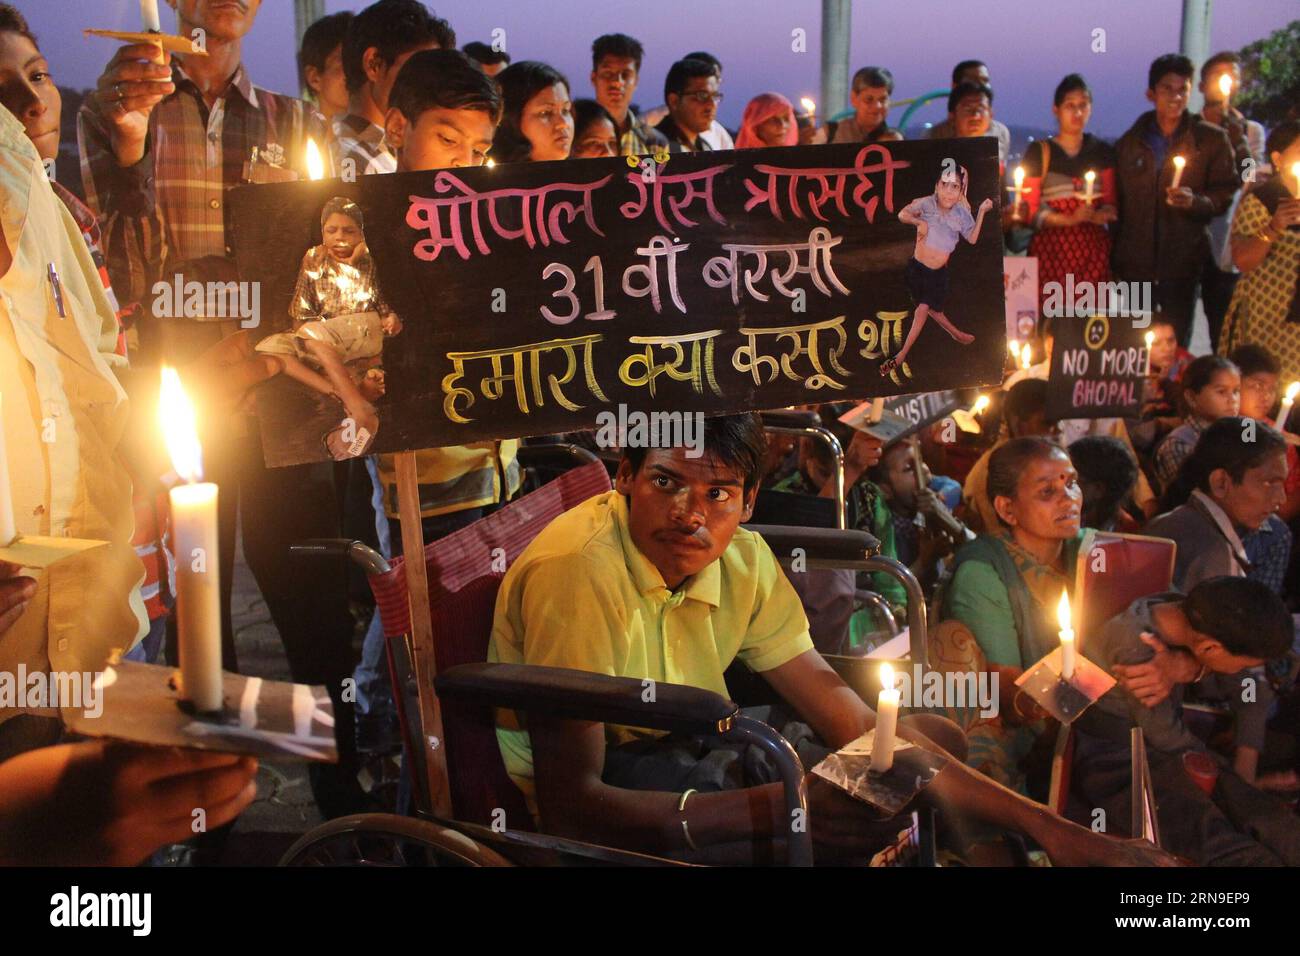 (151202) -- BHOPAL, Dec. 1, 2015 () -- Survivors descendants with congenital disabilities light candles during a vigil marking the 31st anniversary of the gas tragedy in Bhopal, India, Dec. 1, 2015. More than 15,000 residents were killed by the gas leakage from the Union Carbide pesticide plant on the night of Dec. 1 to 3, 1984 in Bhopal, considered the world s worst industrial disaster. (/Stringer) INDIA-BHOPAL-BHOPAL DISASTER-CONDOLENCE Xinhua PUBLICATIONxNOTxINxCHN   151202 Bhopal DEC 1 2015 Survivors descendants With congenital Disabilities Light Candles during a Vigil marking The 31st Ann Stock Photo